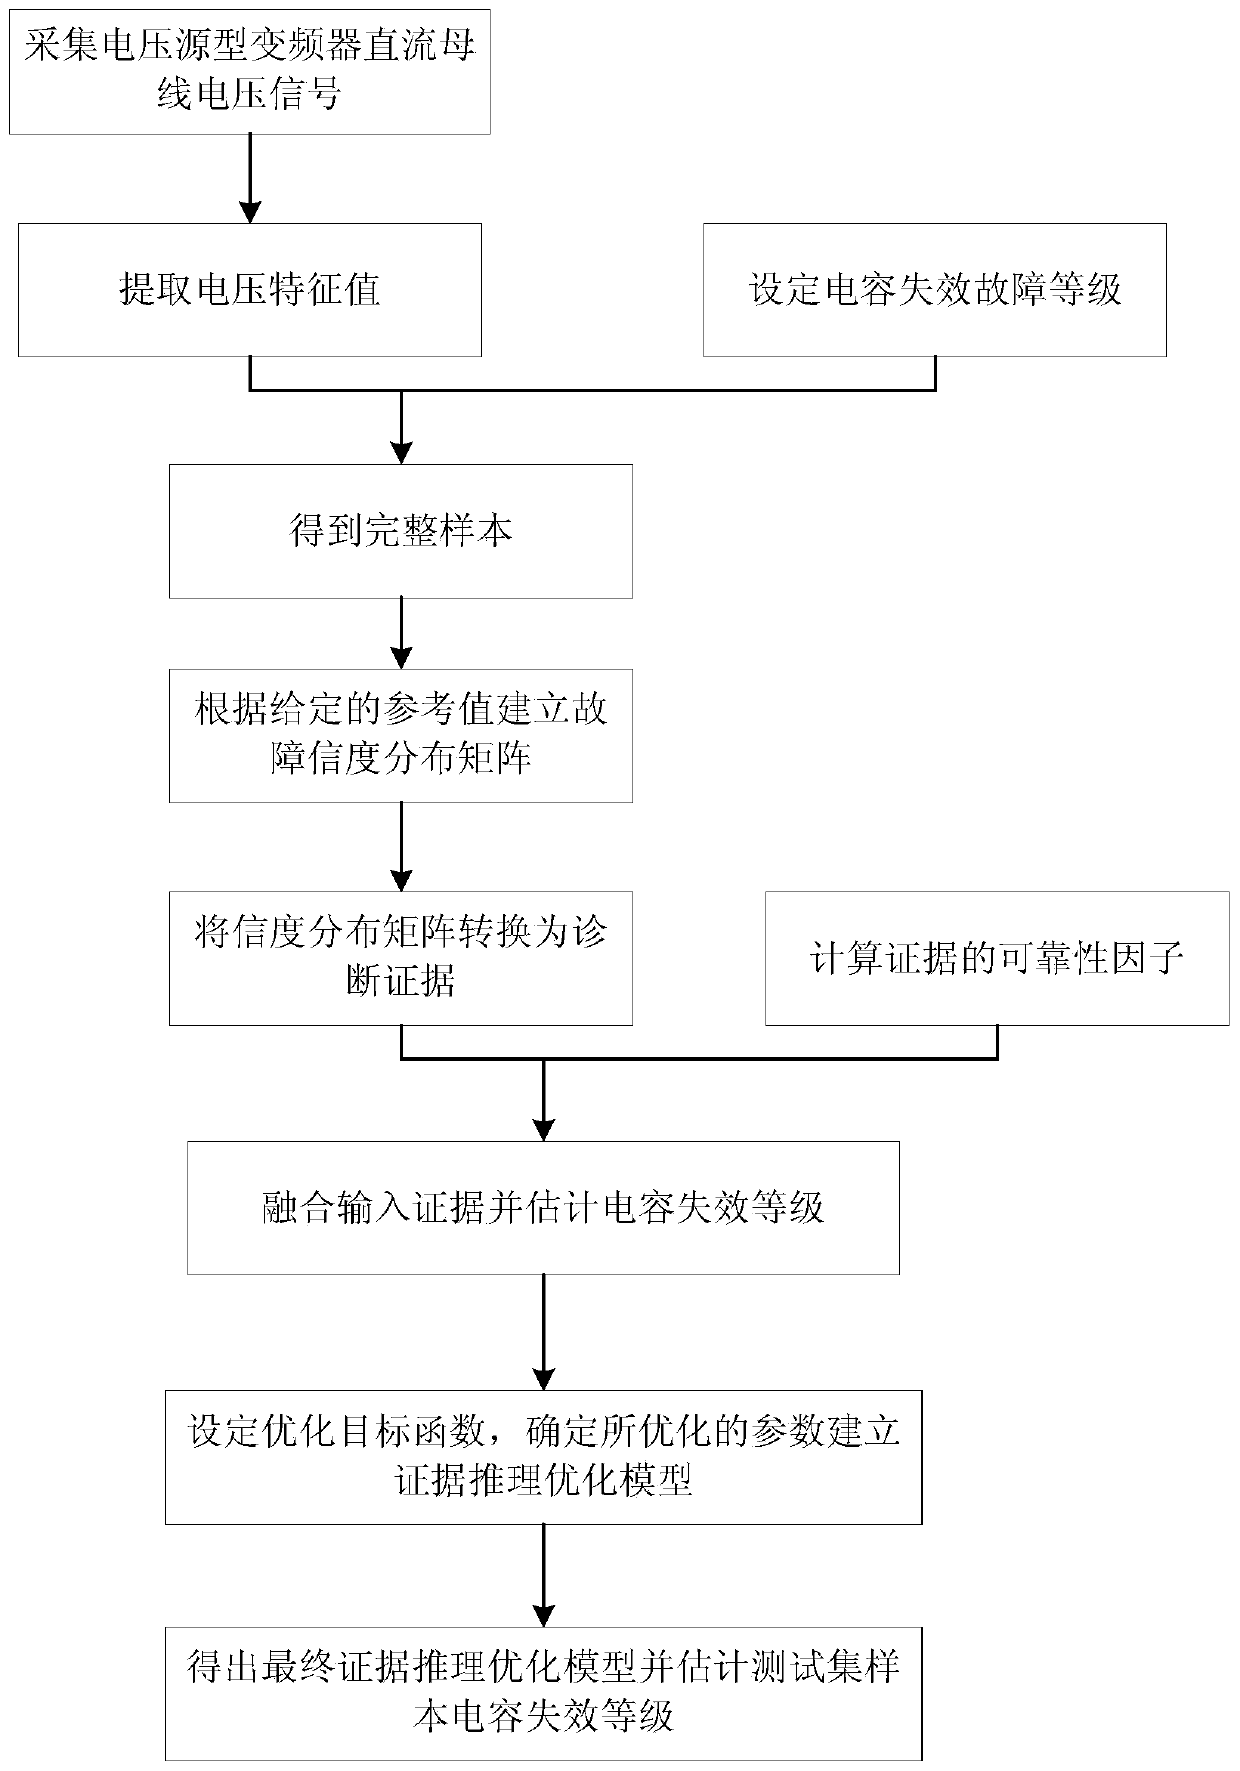 Evidence reasoning rule-based voltage source-type inverter DC bus capacitor fault diagnosis method